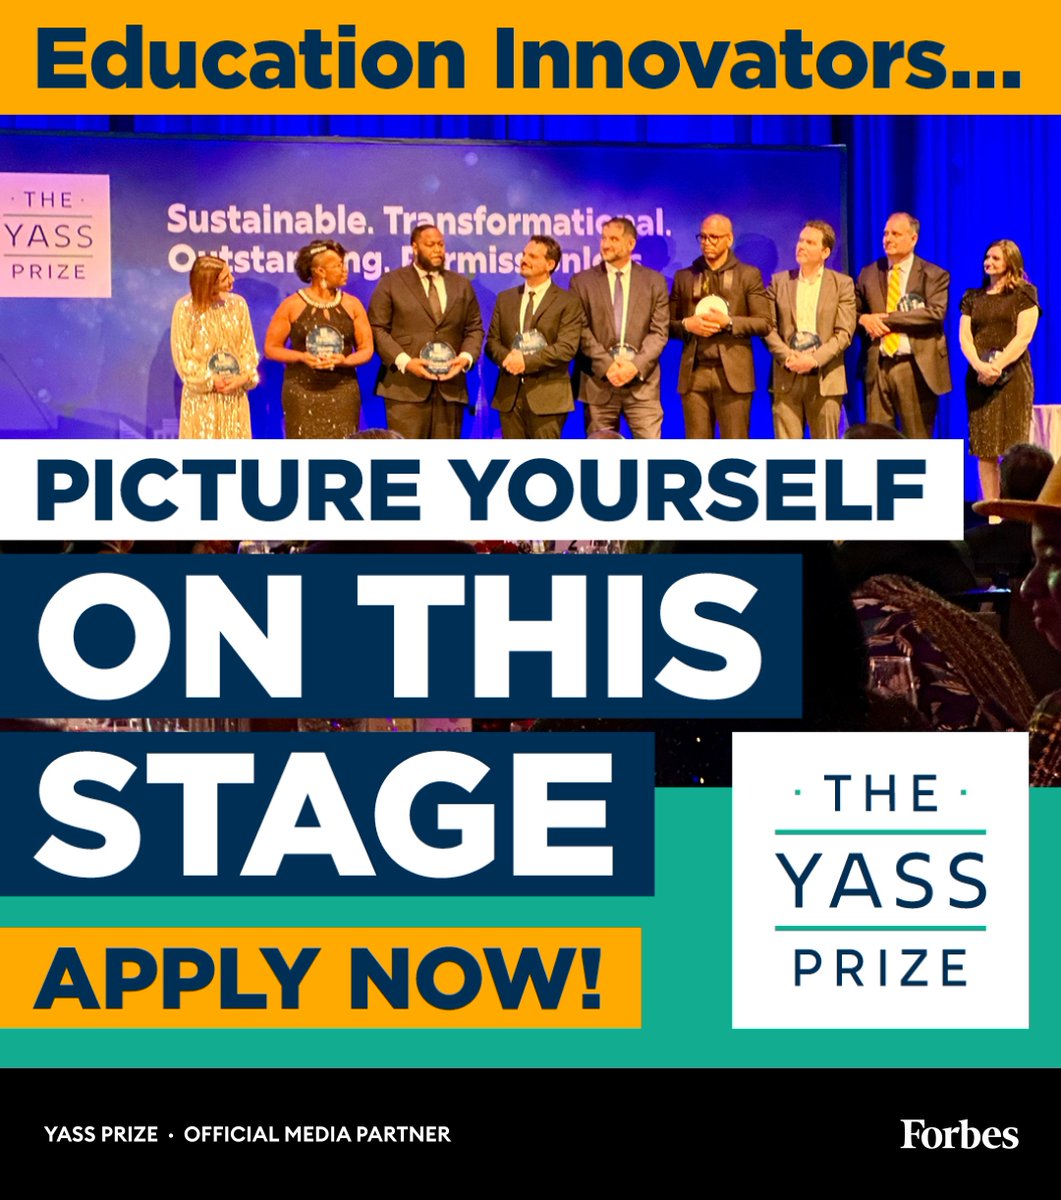 Submit your application to the @YassPrize and STOP Awards, which will recognize and reward education providers who are creating a transformational experience for U.S. K-12 students. Apply by 12PM ET on Thursday, April 18th: yassprize.org